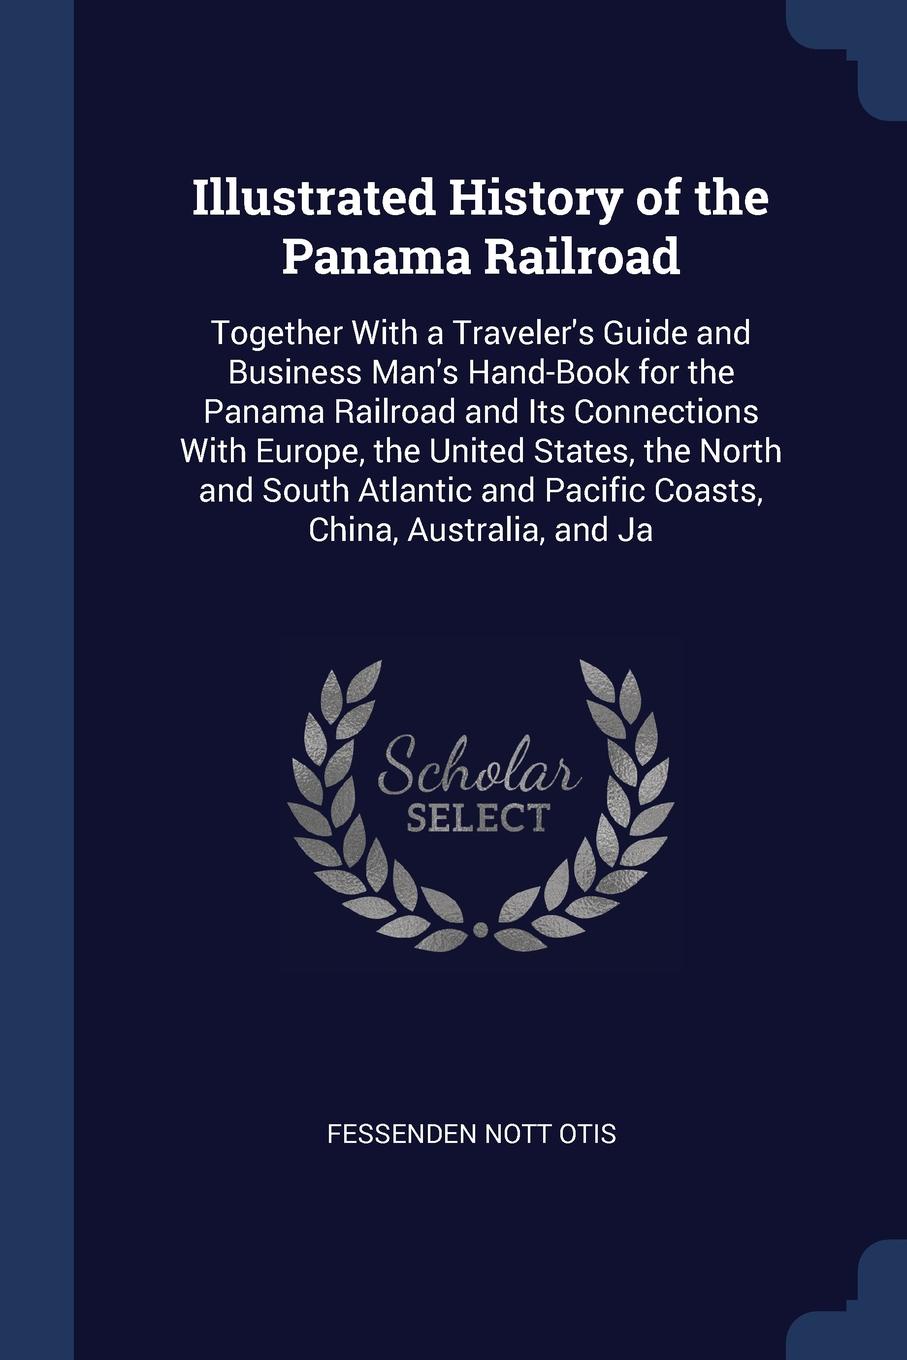 Illustrated History of the Panama Railroad. Together With a Traveler`s Guide and Business Man`s Hand-Book for the Panama Railroad and Its Connections With Europe, the United States, the North and South Atlantic and Pacific Coasts, China, Australia...